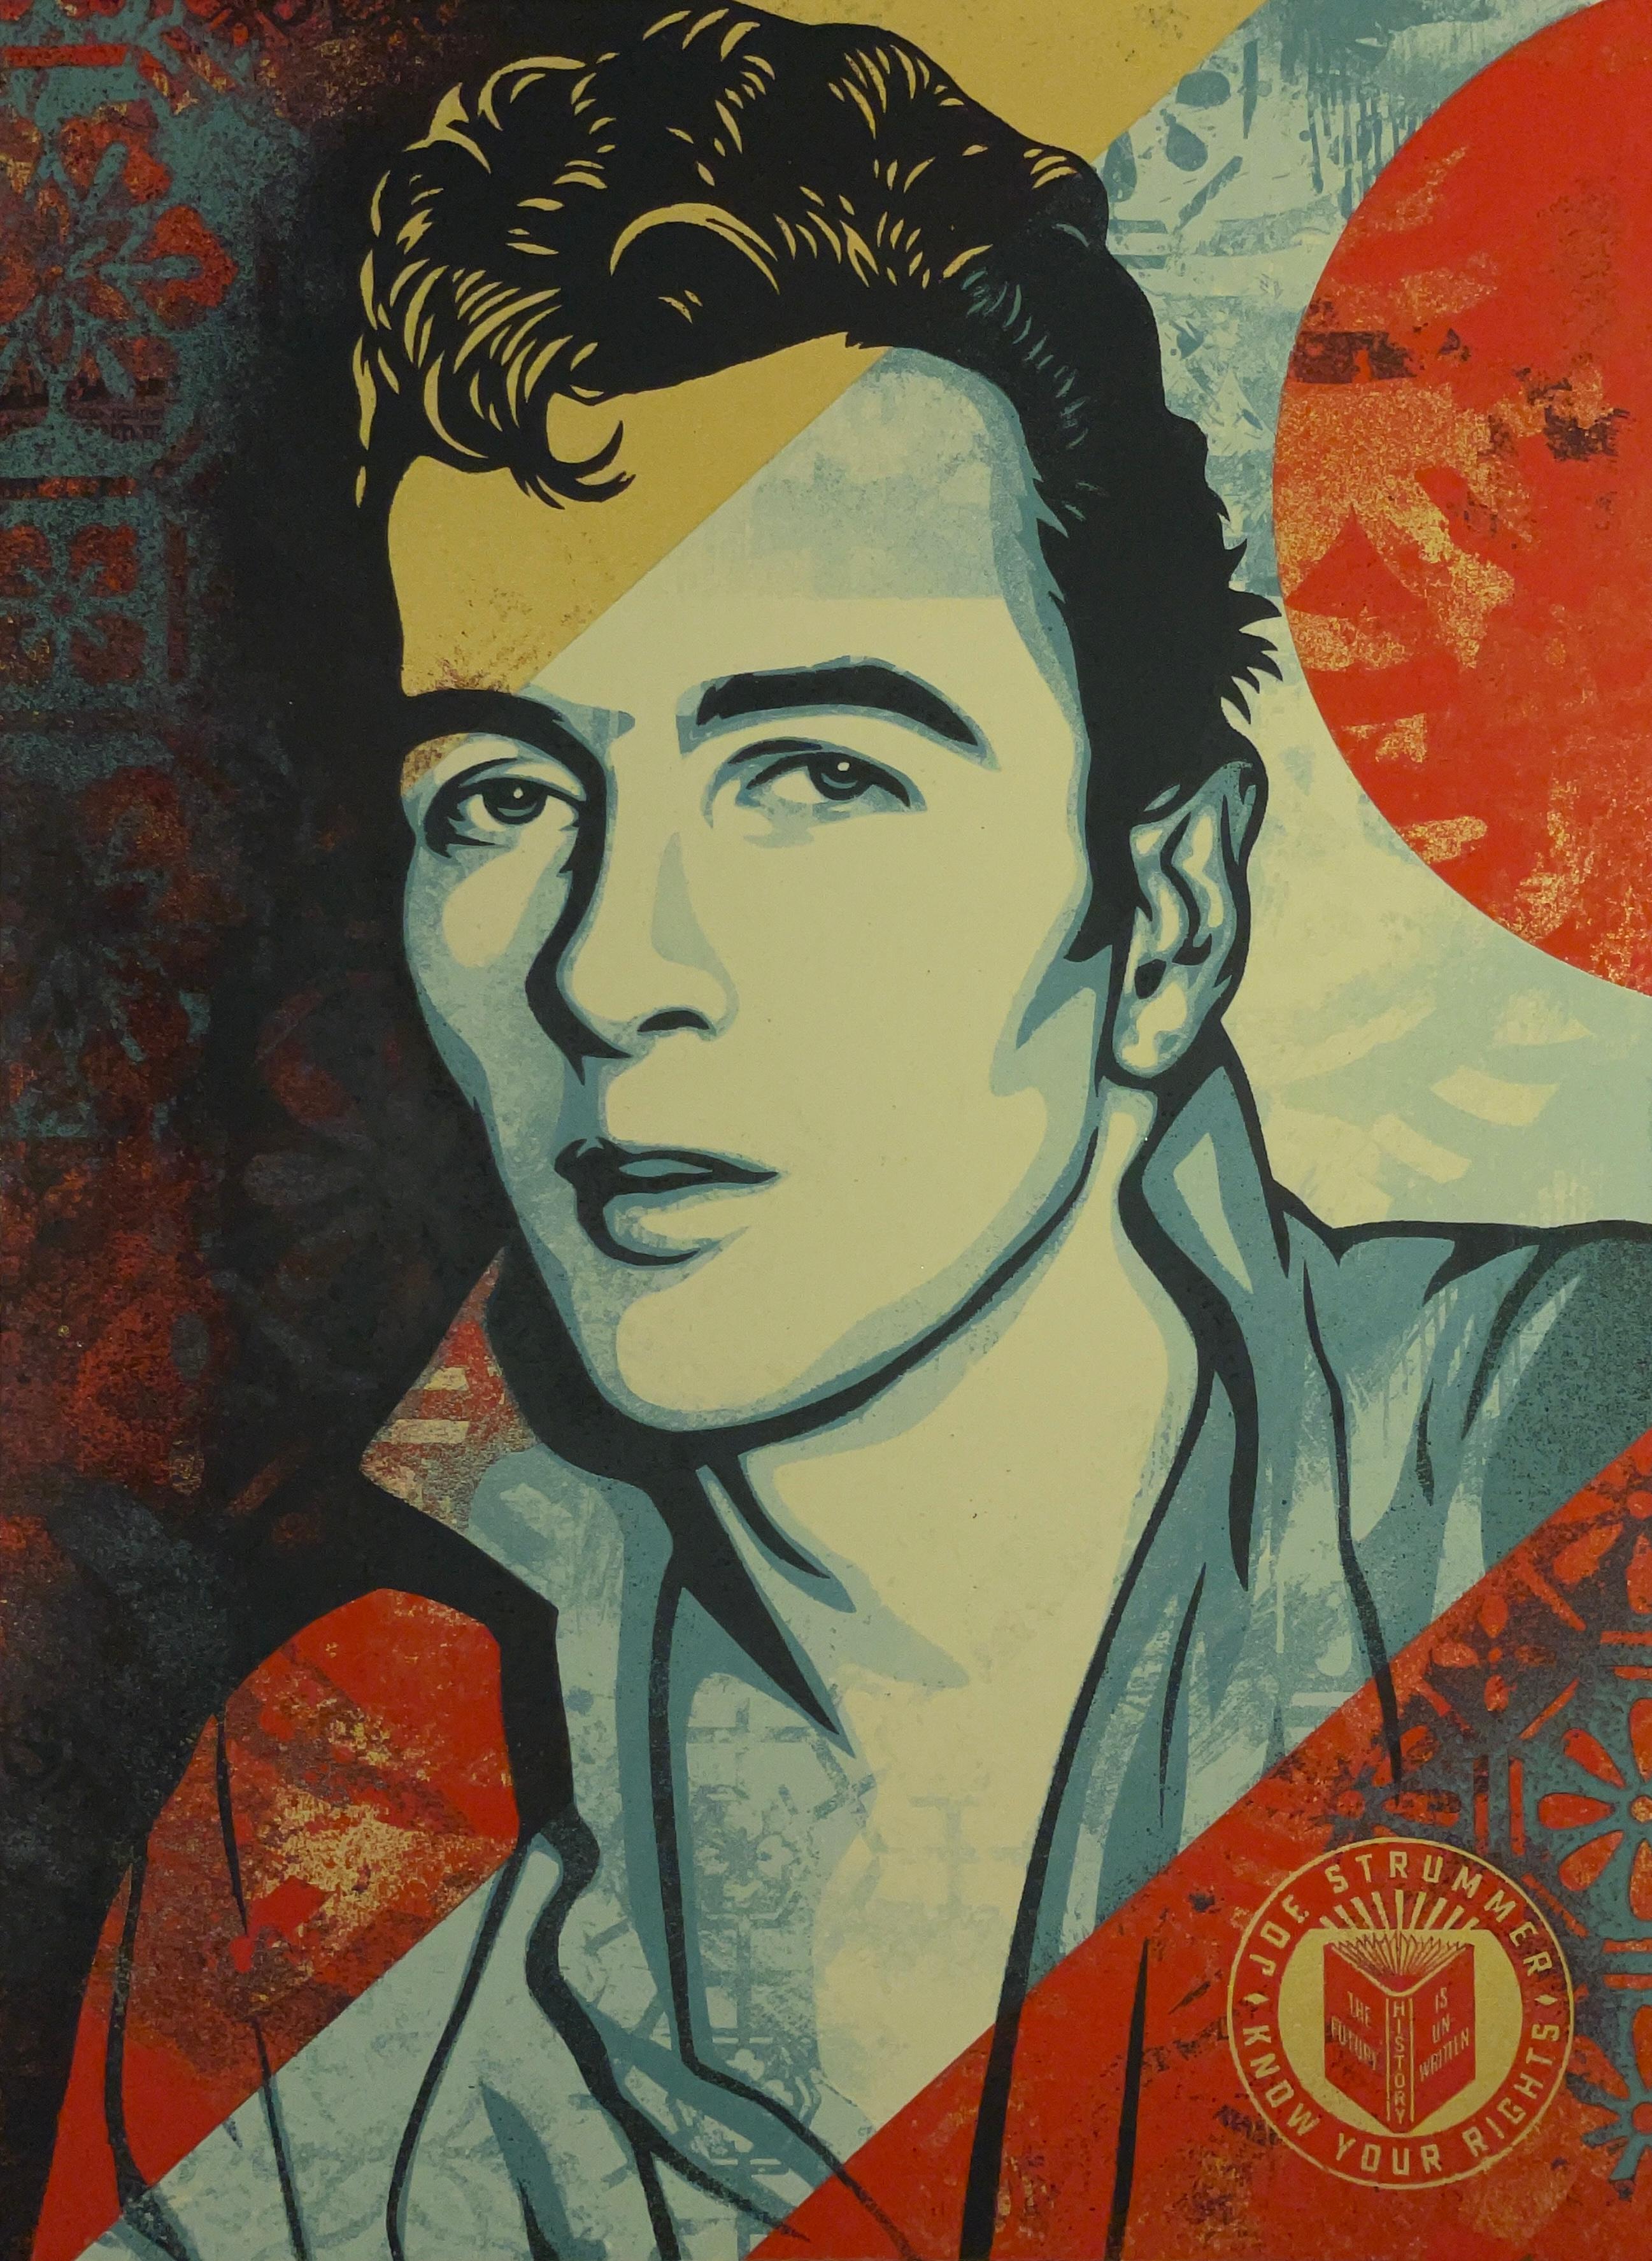 With my ICONS art show happening this weekend, it made sense to celebrate the musical and philosophical icon Joe Strummer, lead singer and lyricist of the Clash who are my all-time favorite band. Joe Strummer is a hero of mine for his music, lyrics,